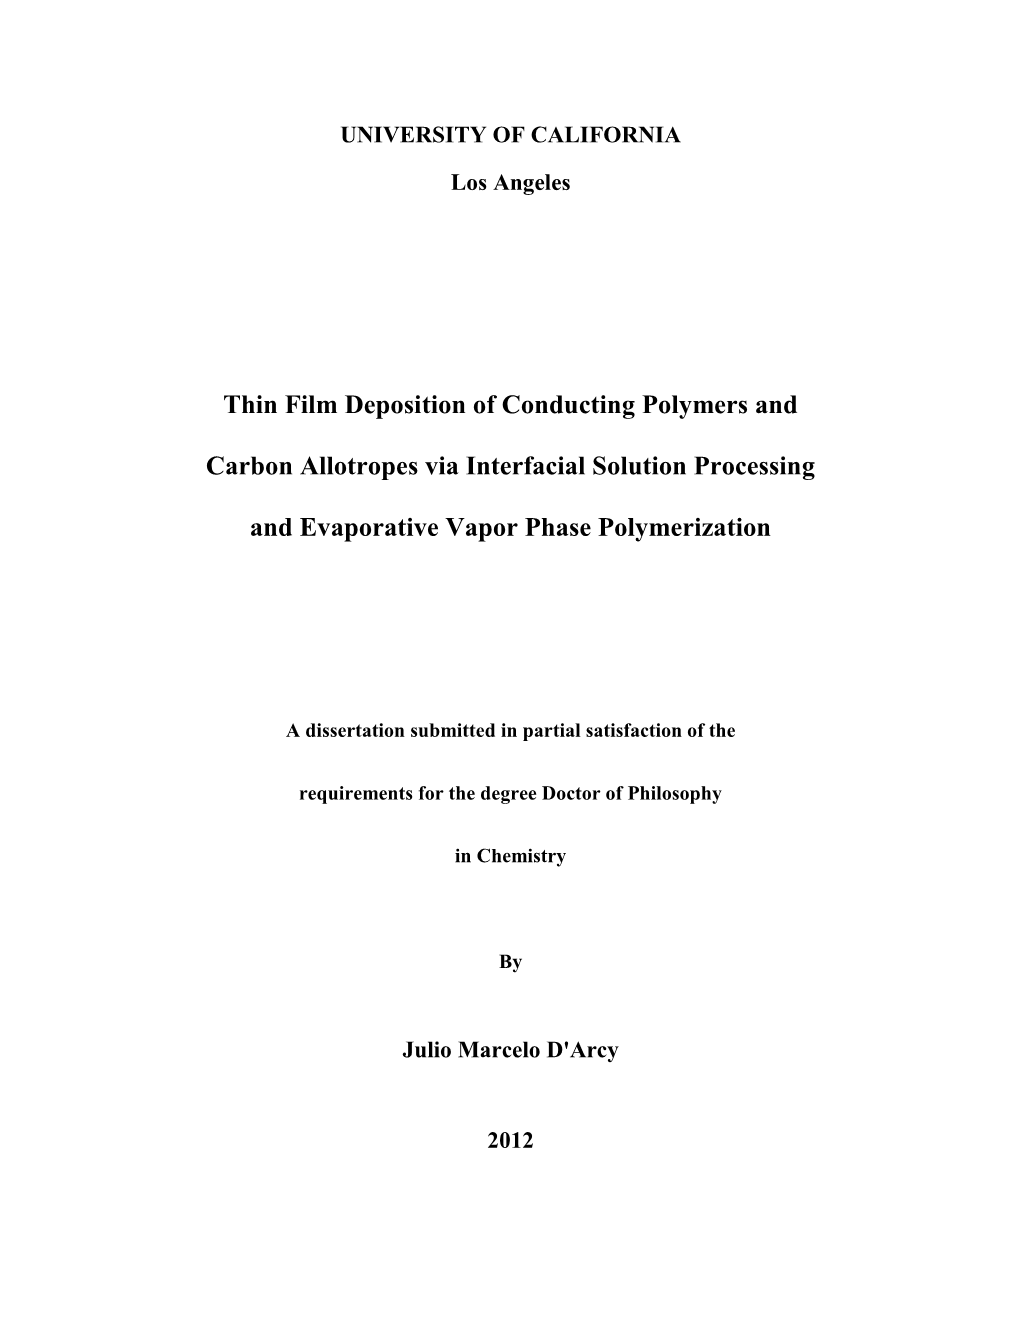 Thin Film Deposition of Conducting Polymers and Carbon Allotropes